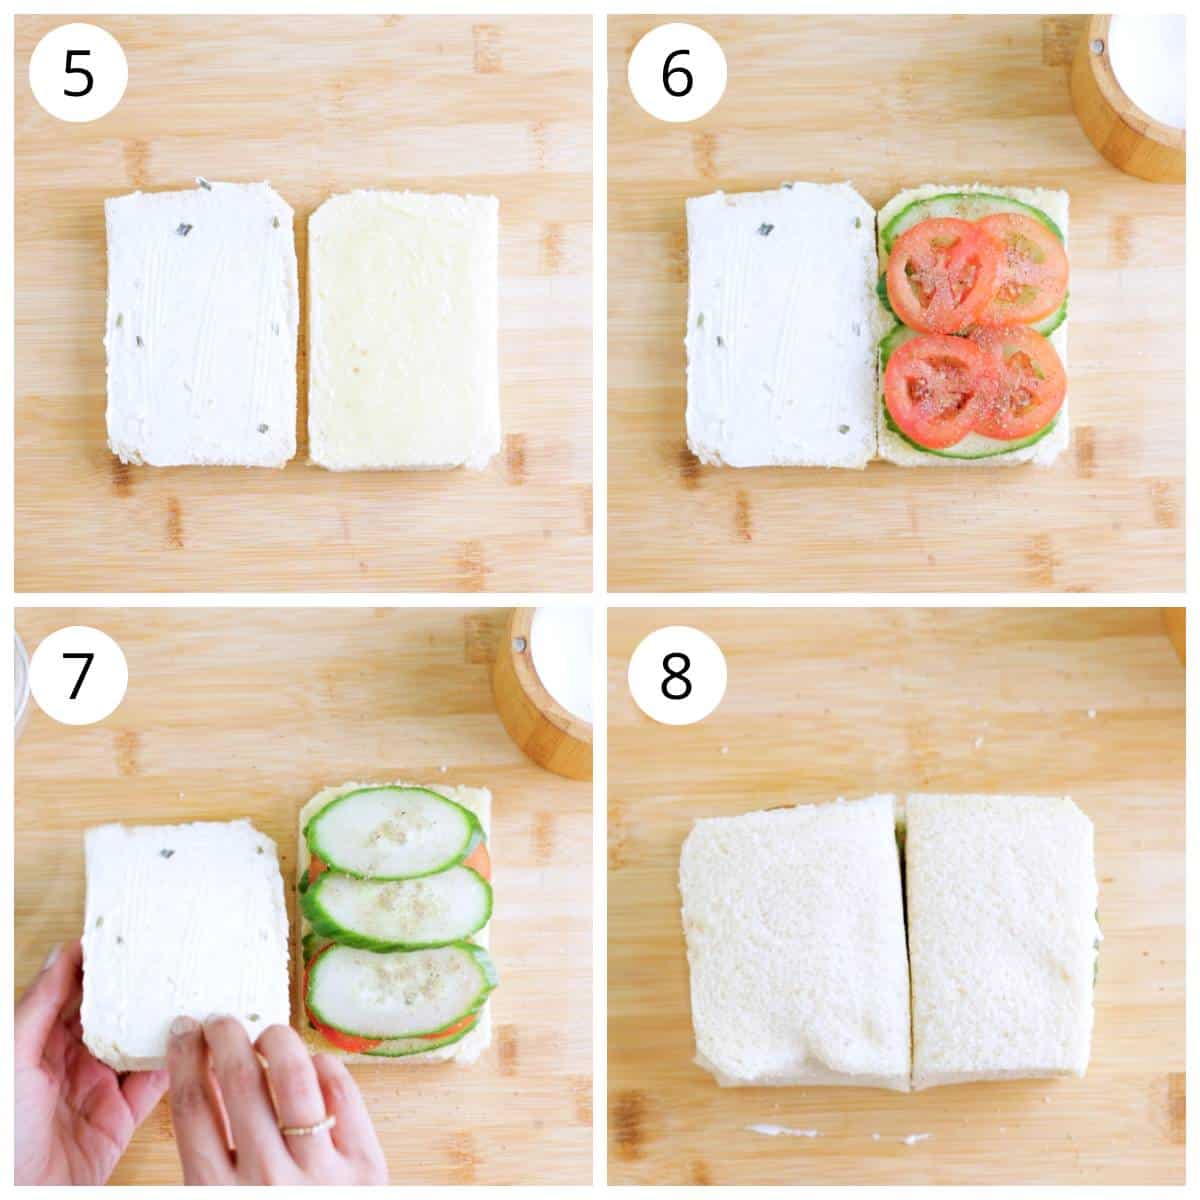 steps showing how to make tomato cucumber sandwich